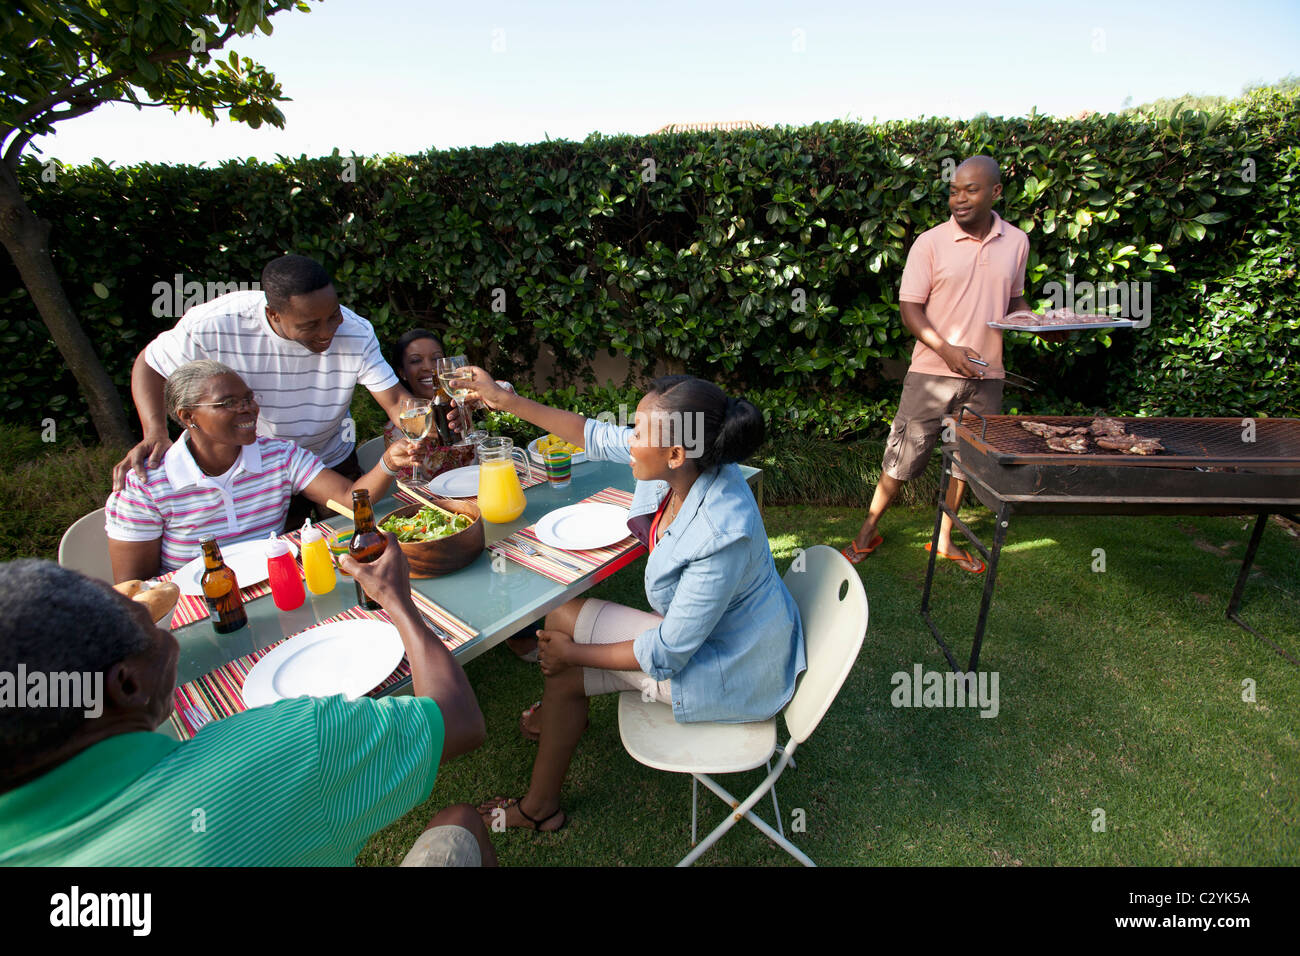 https://c8.alamy.com/comp/C2YK5A/people-sitting-outside-with-braai-in-background-johannesburg-south-C2YK5A.jpg